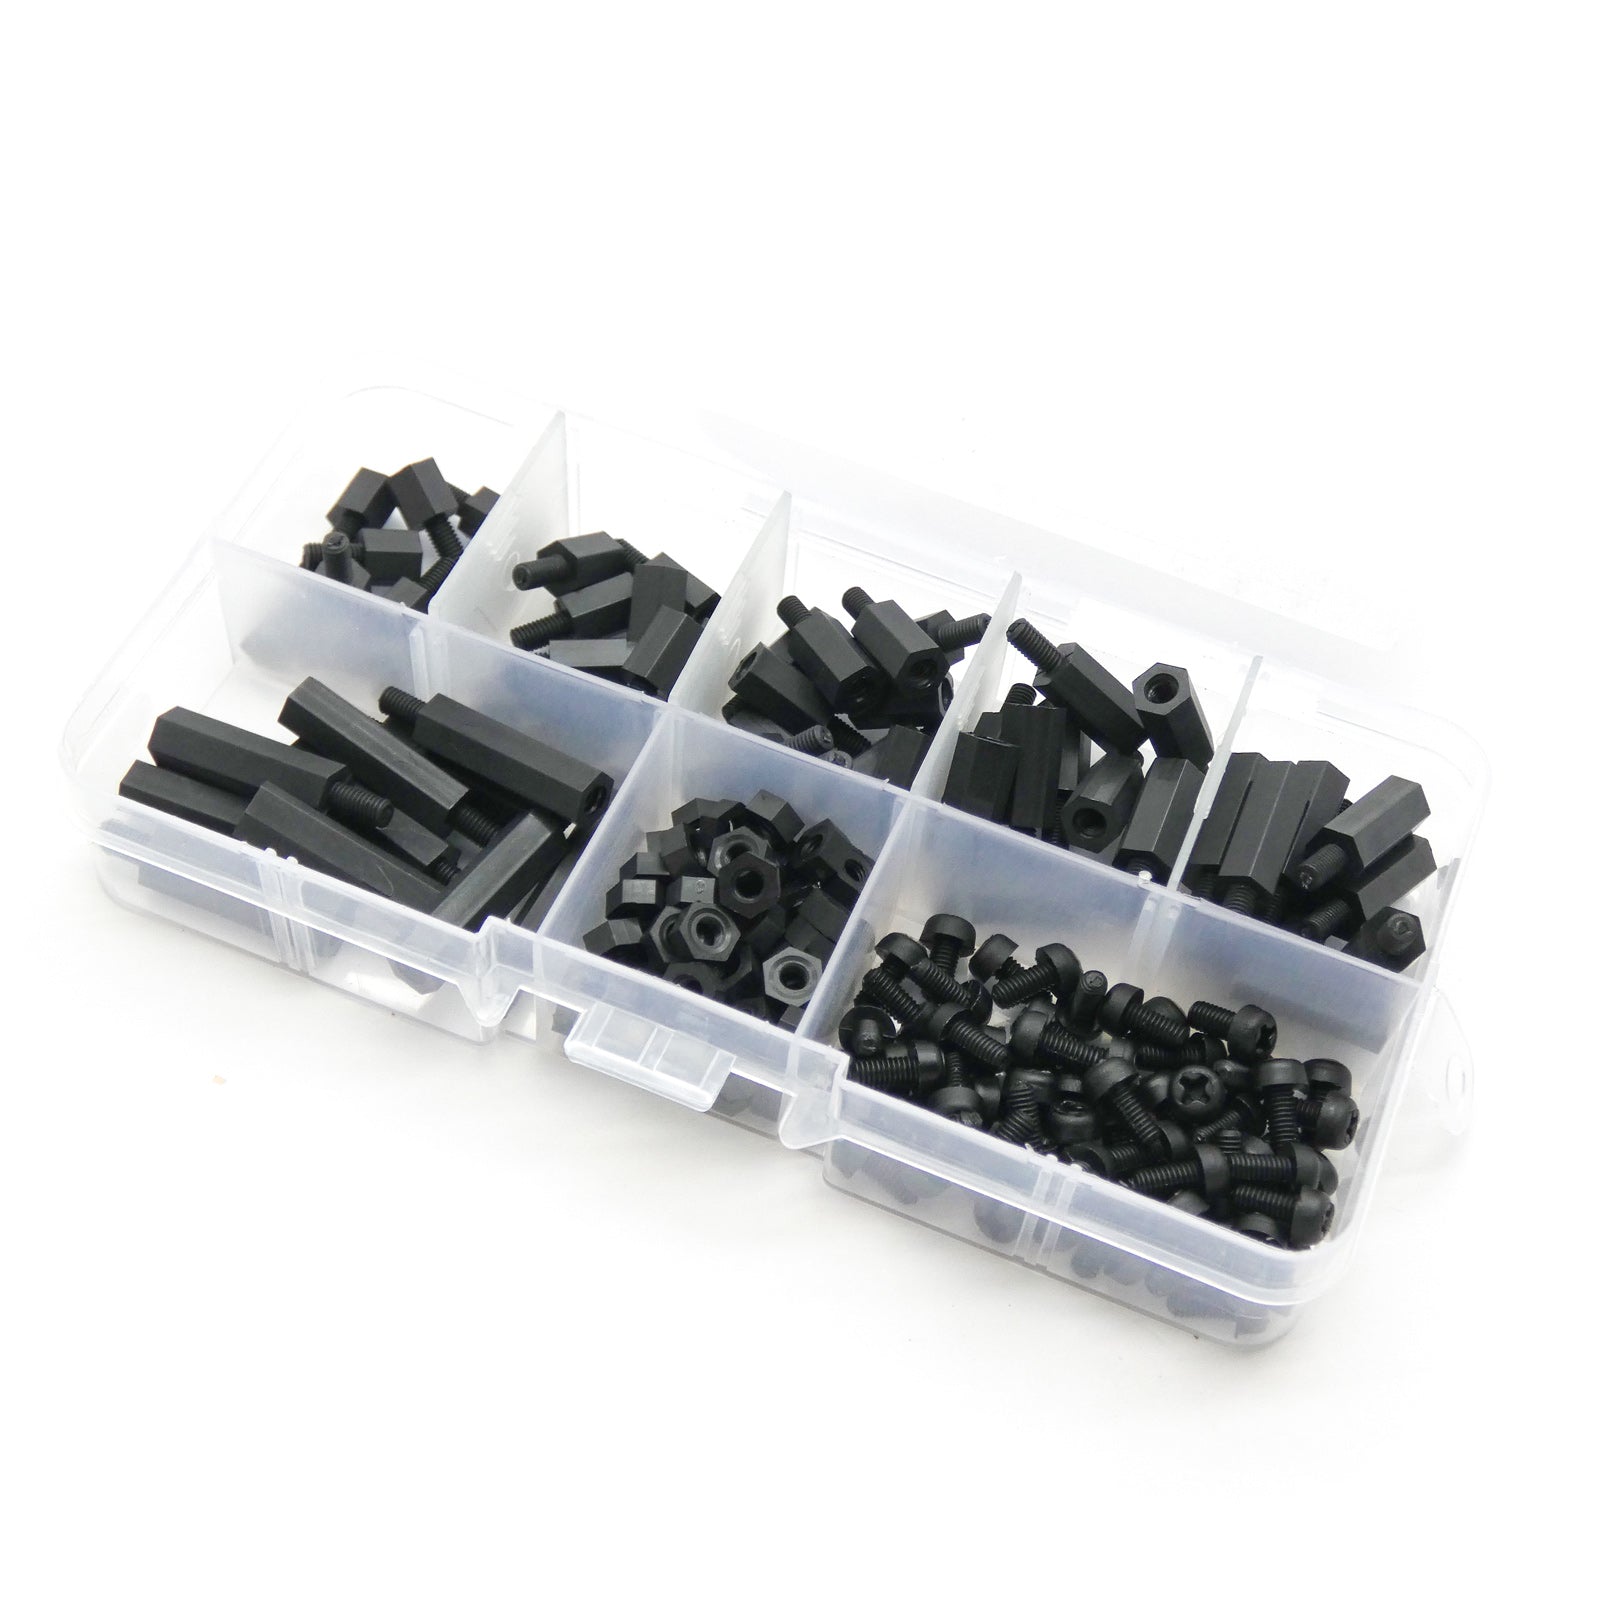 Nylon M3 Hex Standoff Kit with Screws Nuts and Spacers (Black